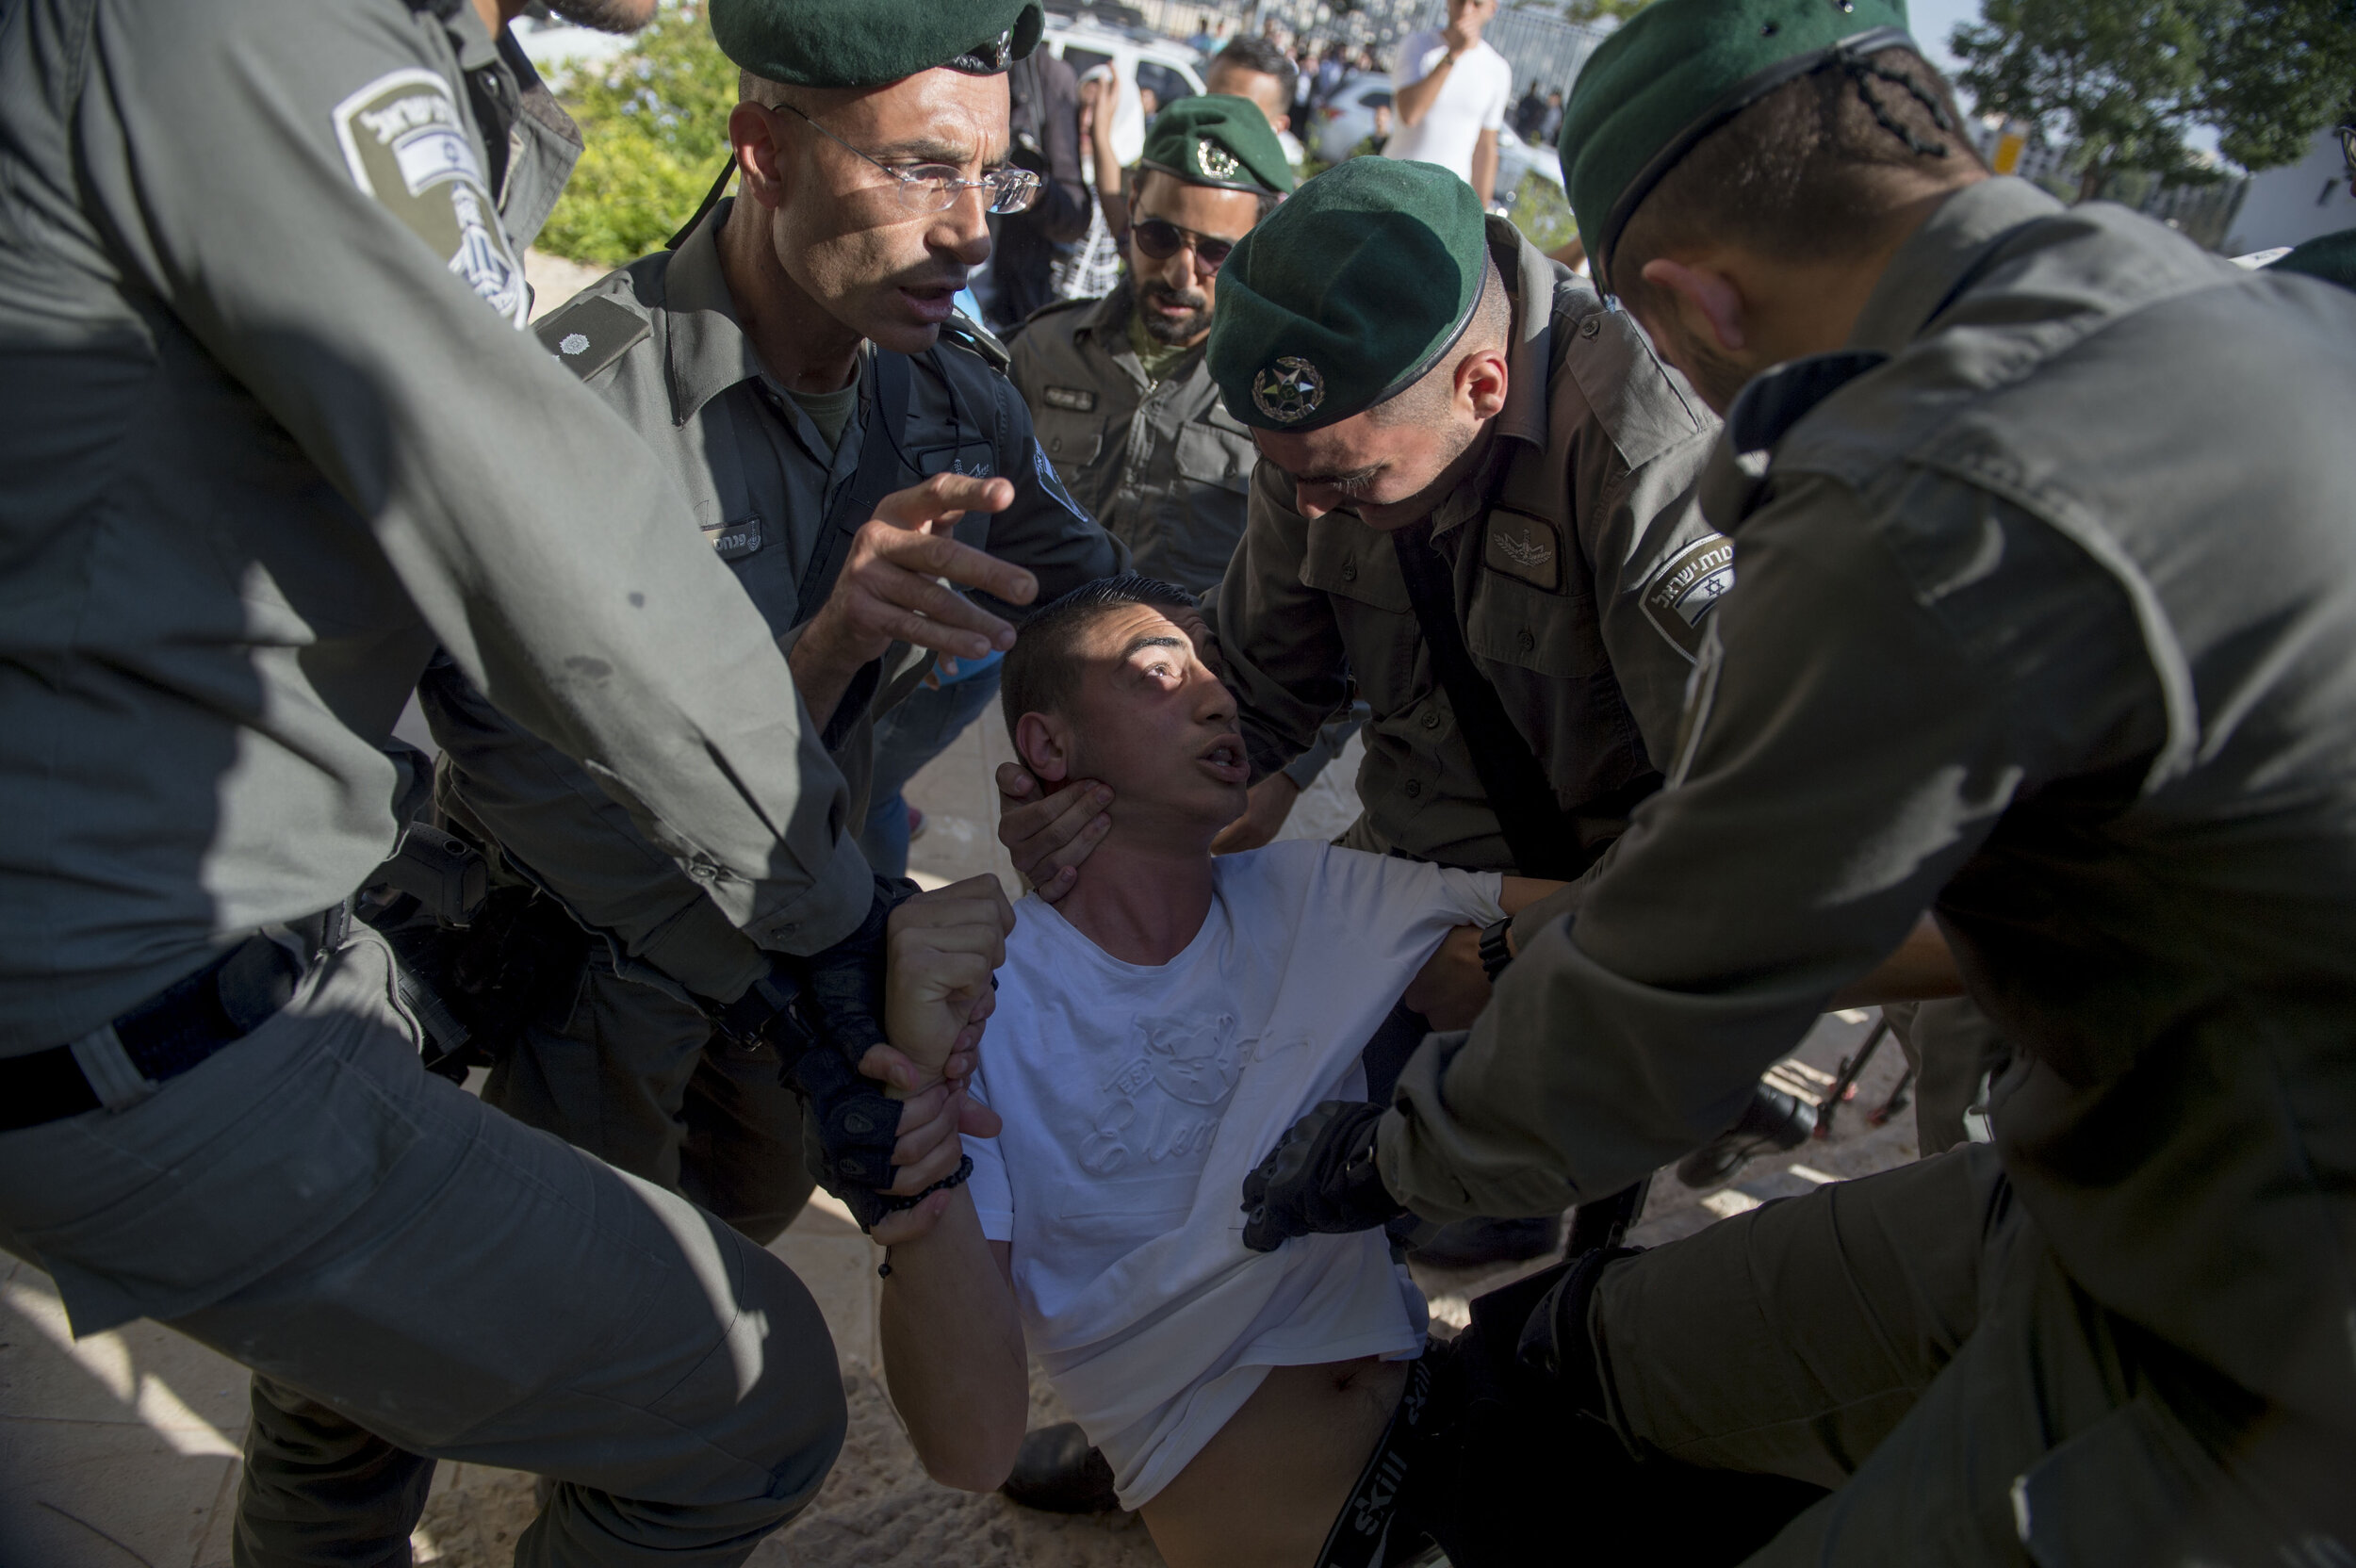  Israeli police arrest a Palestinian protester during a protest against the moving of the US Embassy to Jerusalem from Tel Aviv. Both Palestine and Israel consider the holy city of Jerusalem to be their rightful capitol and Donald Trump’s moving of t